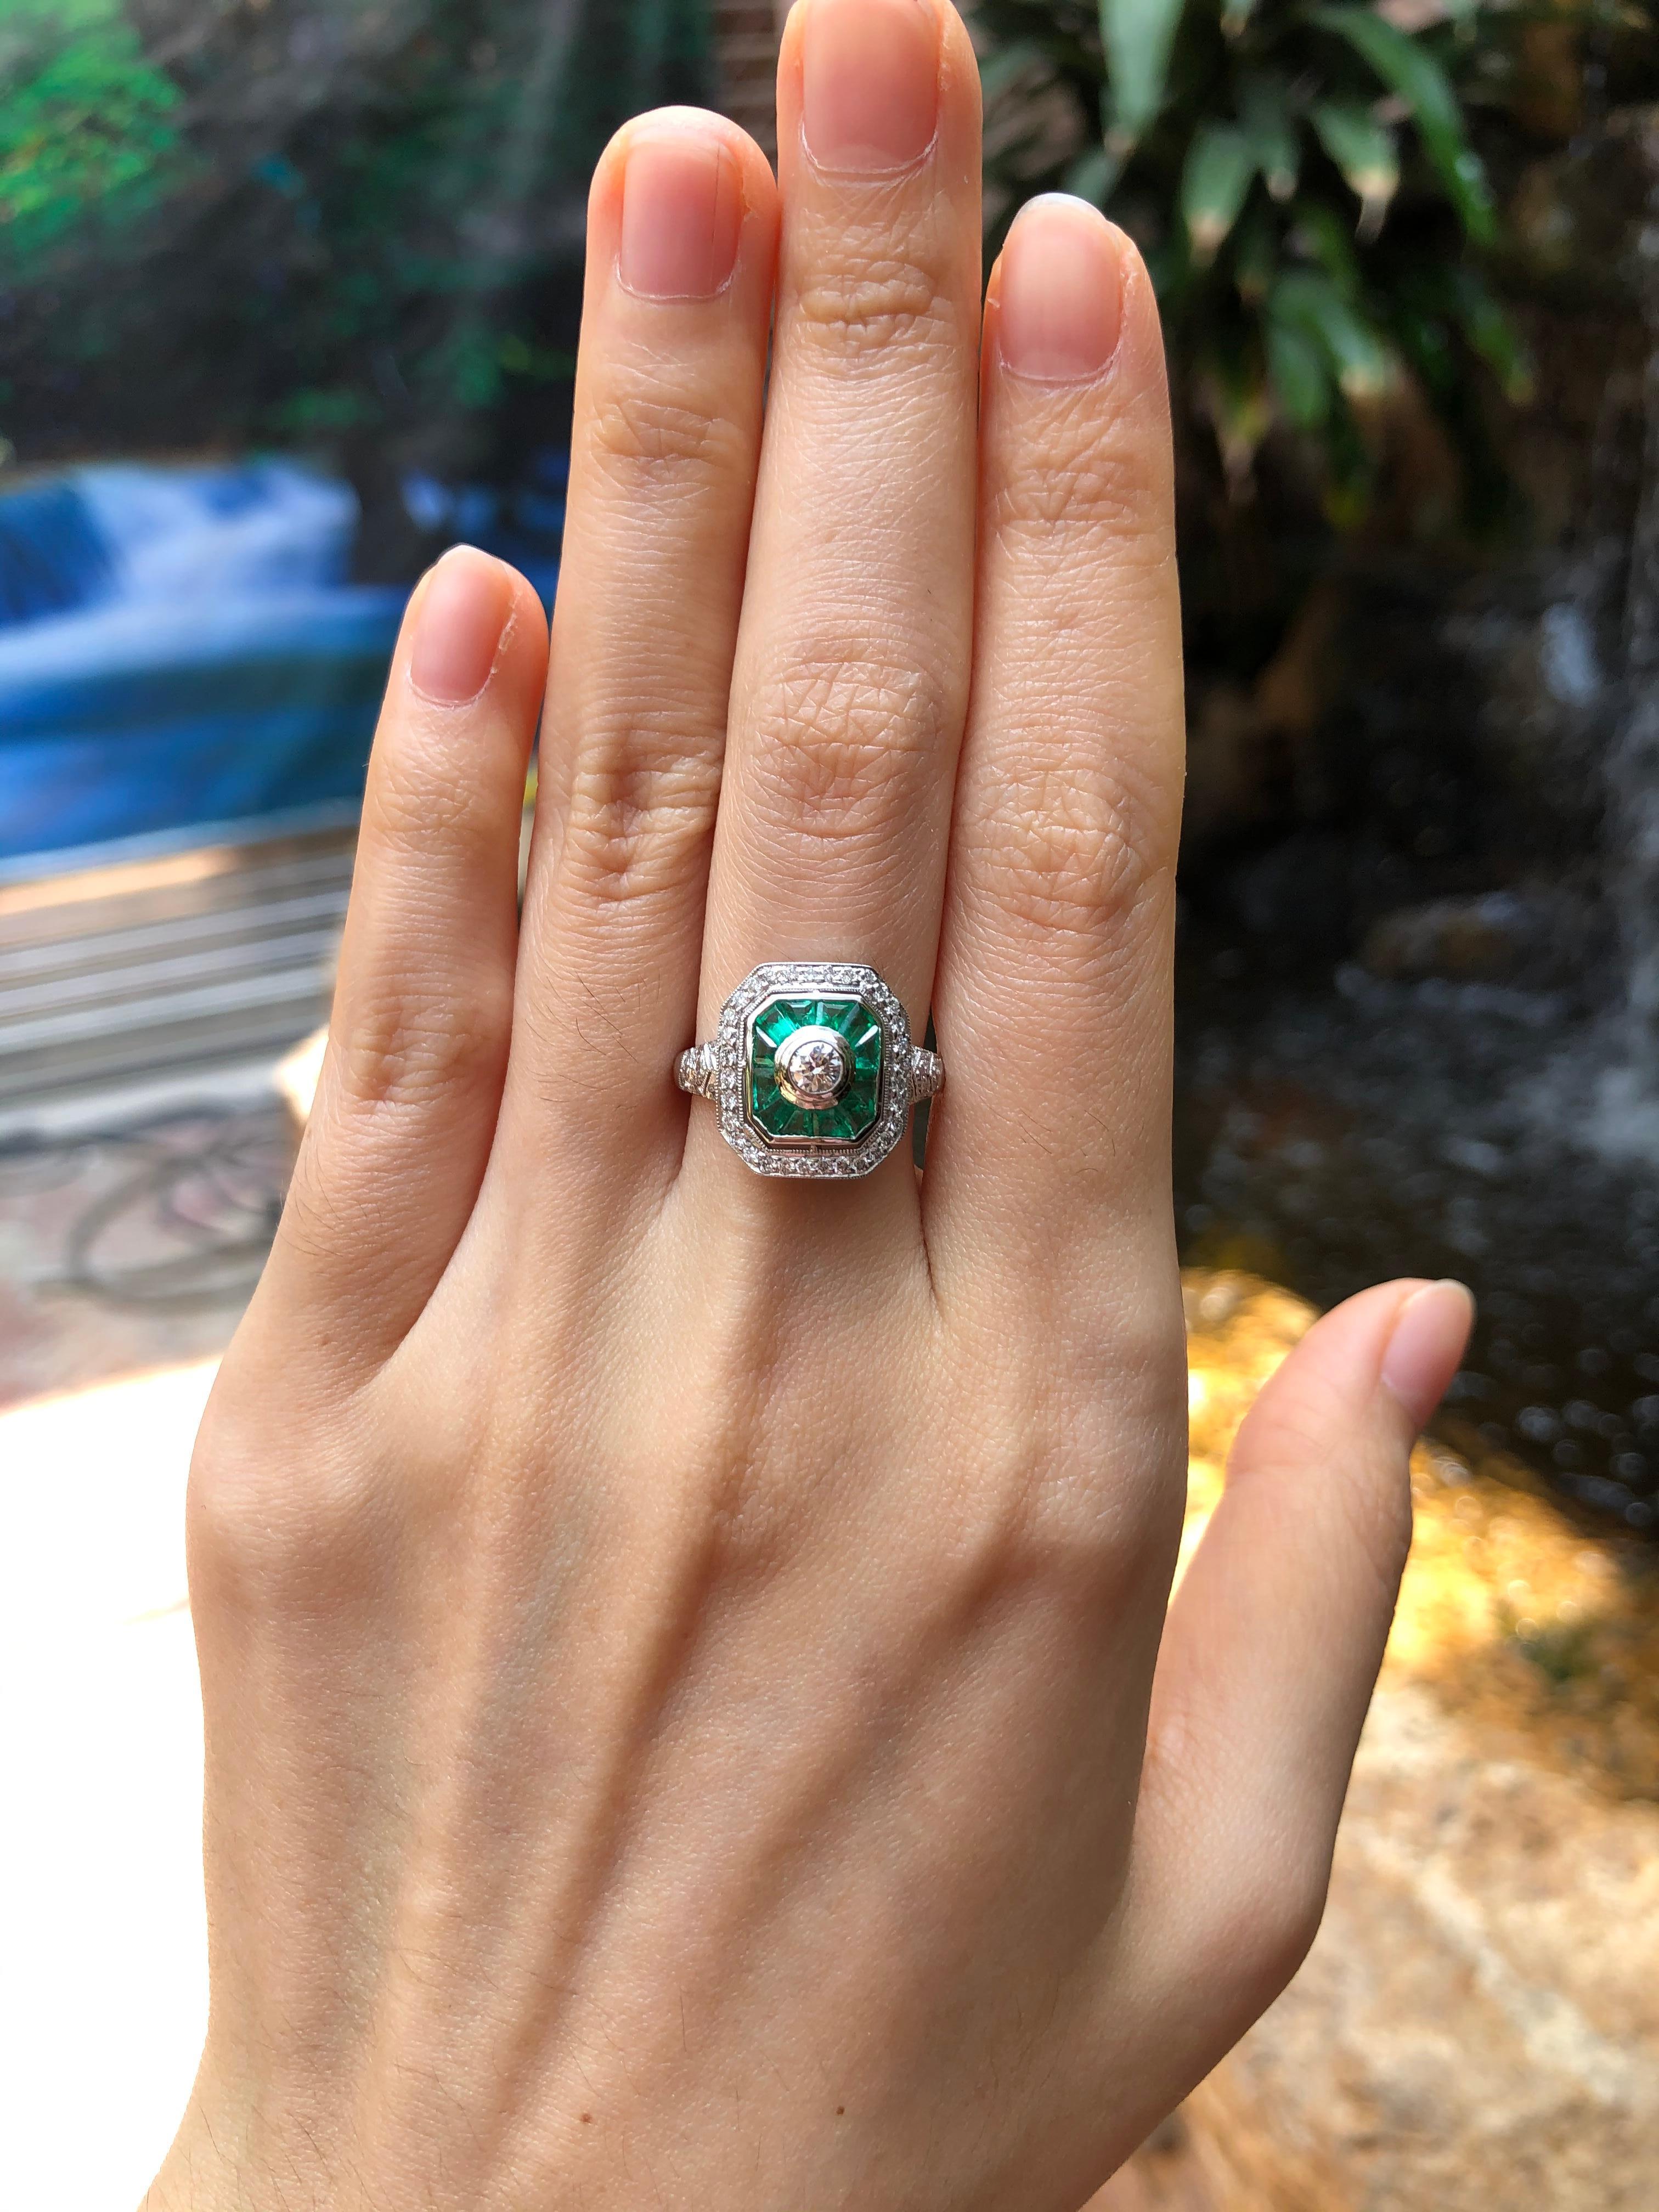 Emerald 0.60 carats with Diamond 0.51 carat Ring set in 18 Karat White Gold Settings

Width:  1.3 cm 
Length: 1.4 cm
Ring Size: 55
Total Weight: 4.46 grams

